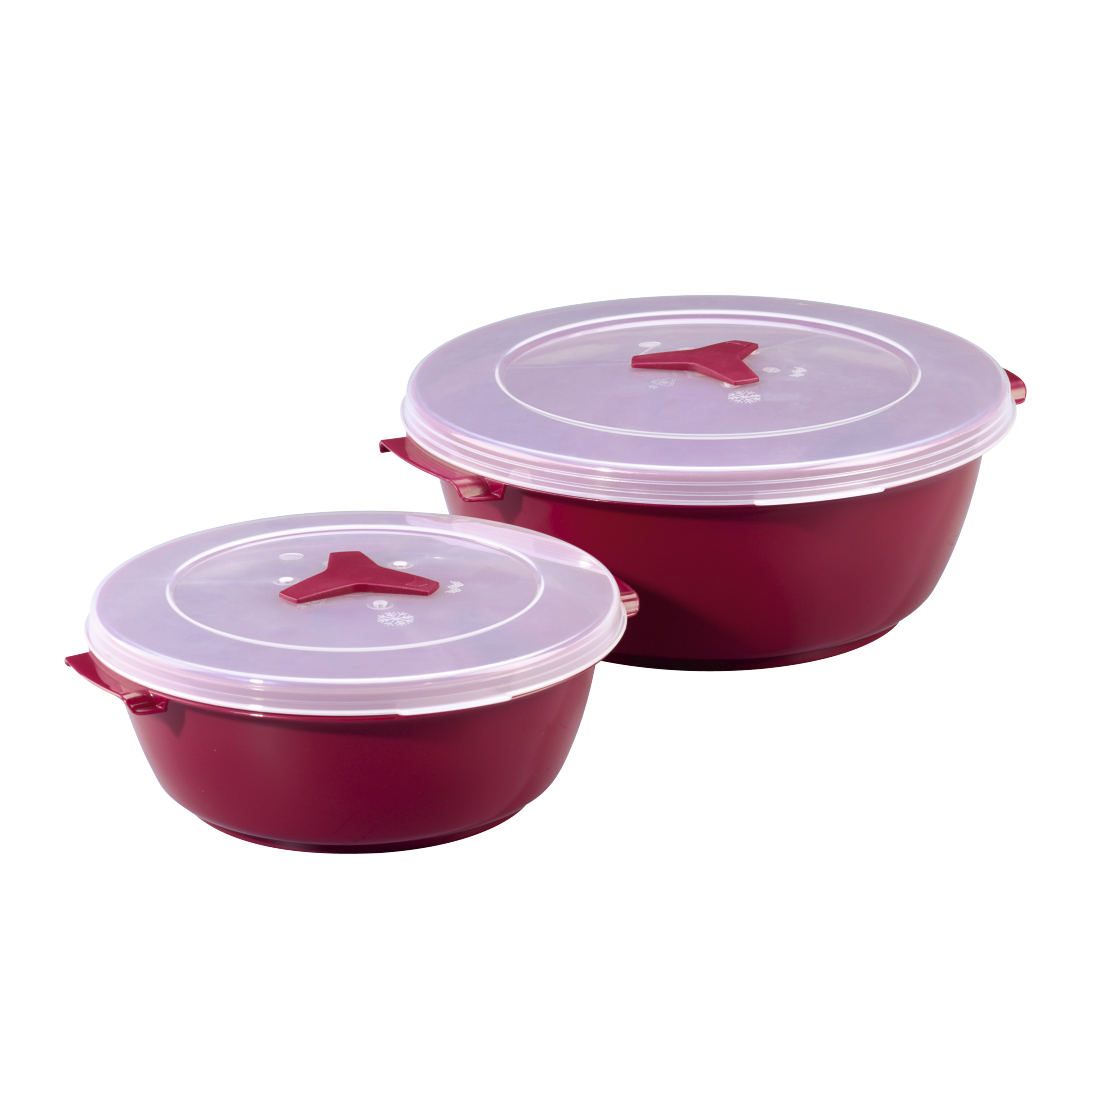 abx3 High-Res Image 3 - Xavax, Round Microwave / Freezer Container Set, 2 Pcs., turquoise / burgundy